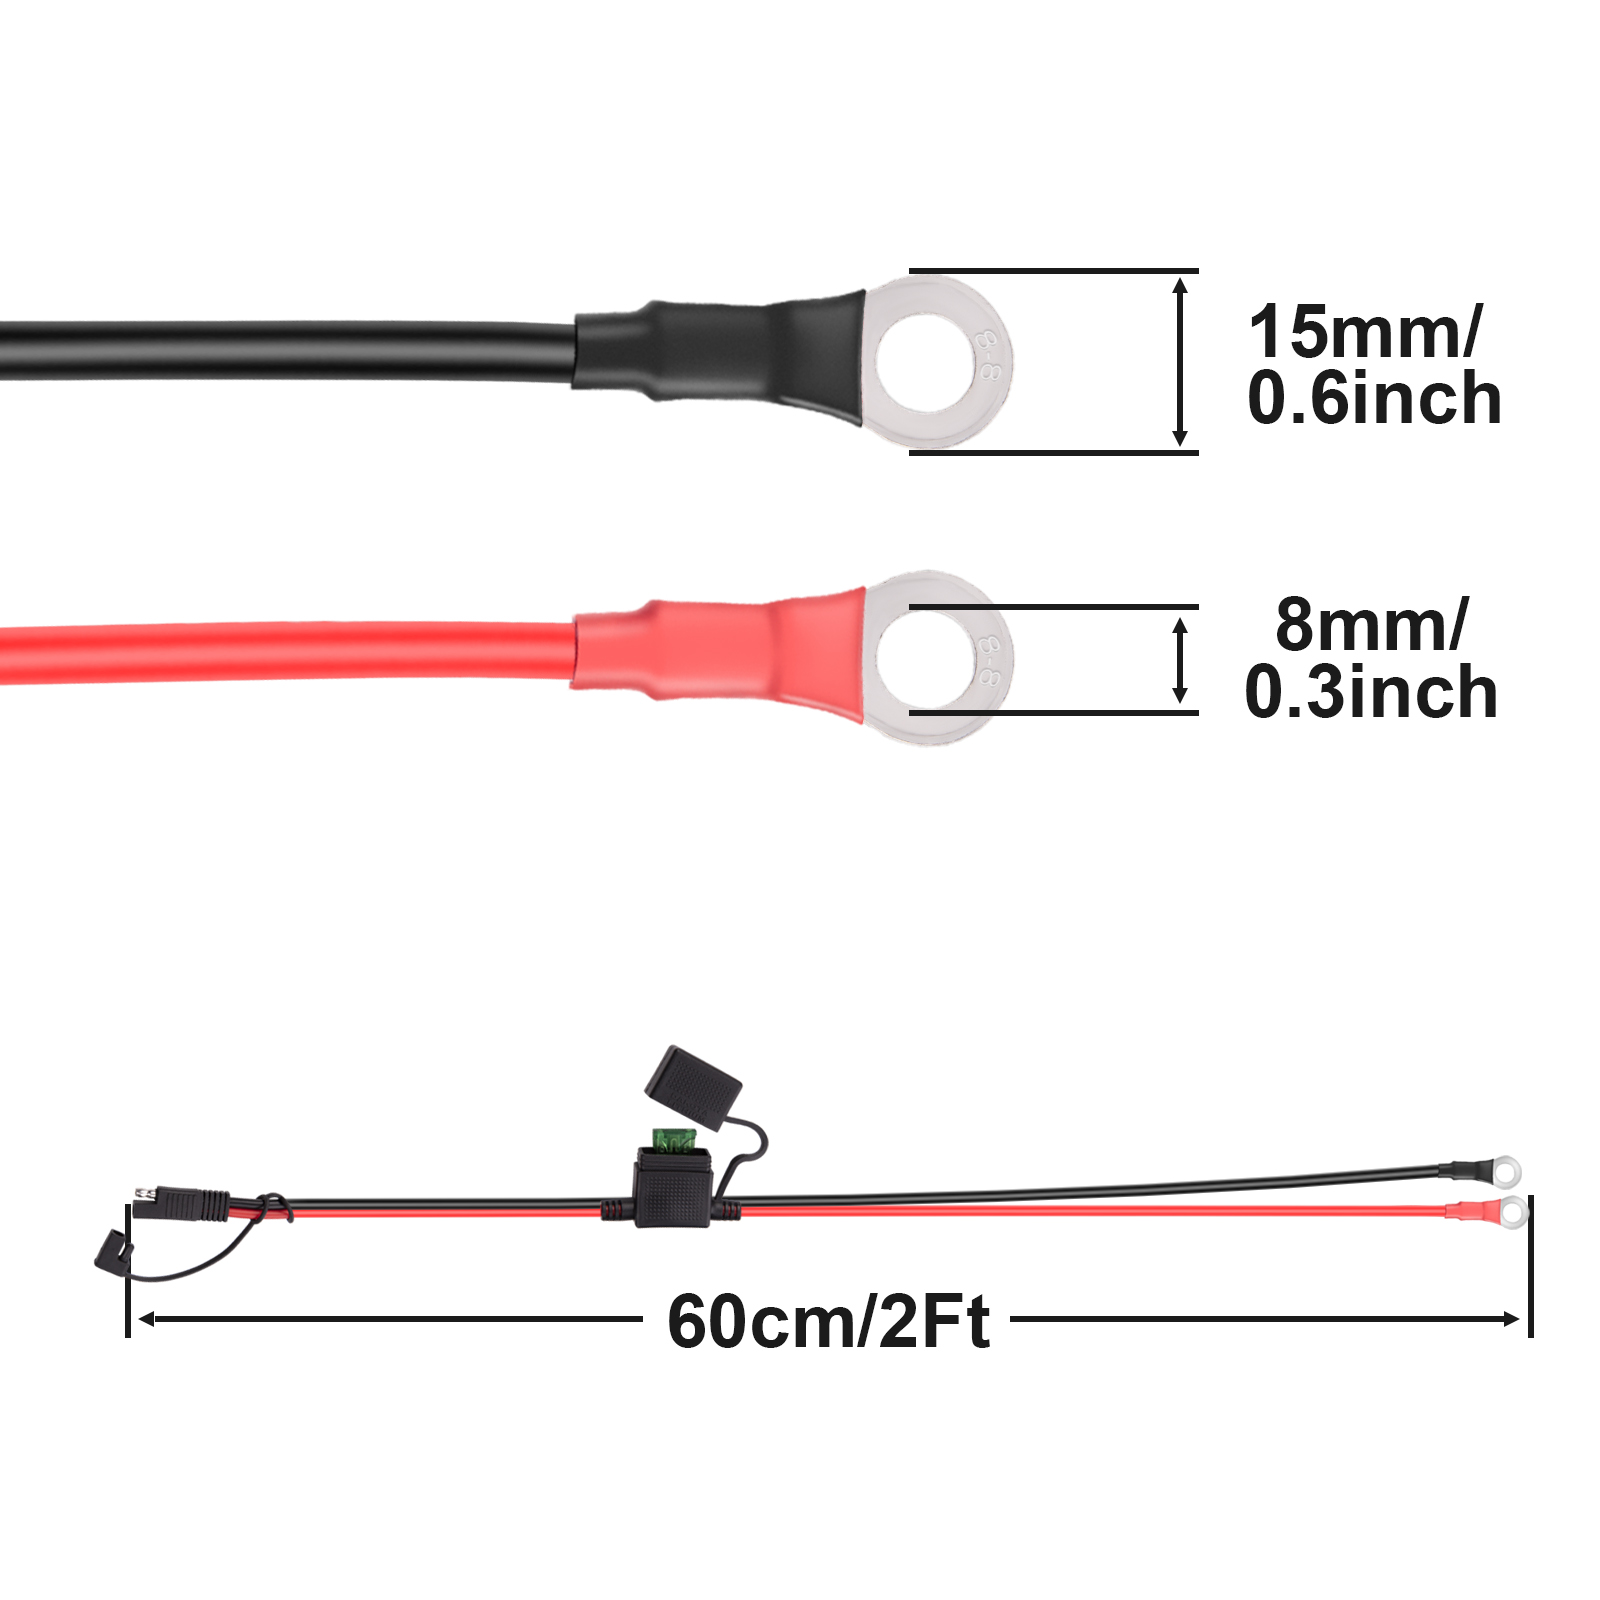 Battery Charge Extension Cable for Motorcycle Cars RVs Boats Battery Tender etc. 10AWG SAE Connector SAE to SAE 2 Pin Quick Disconnect Wire Harness 